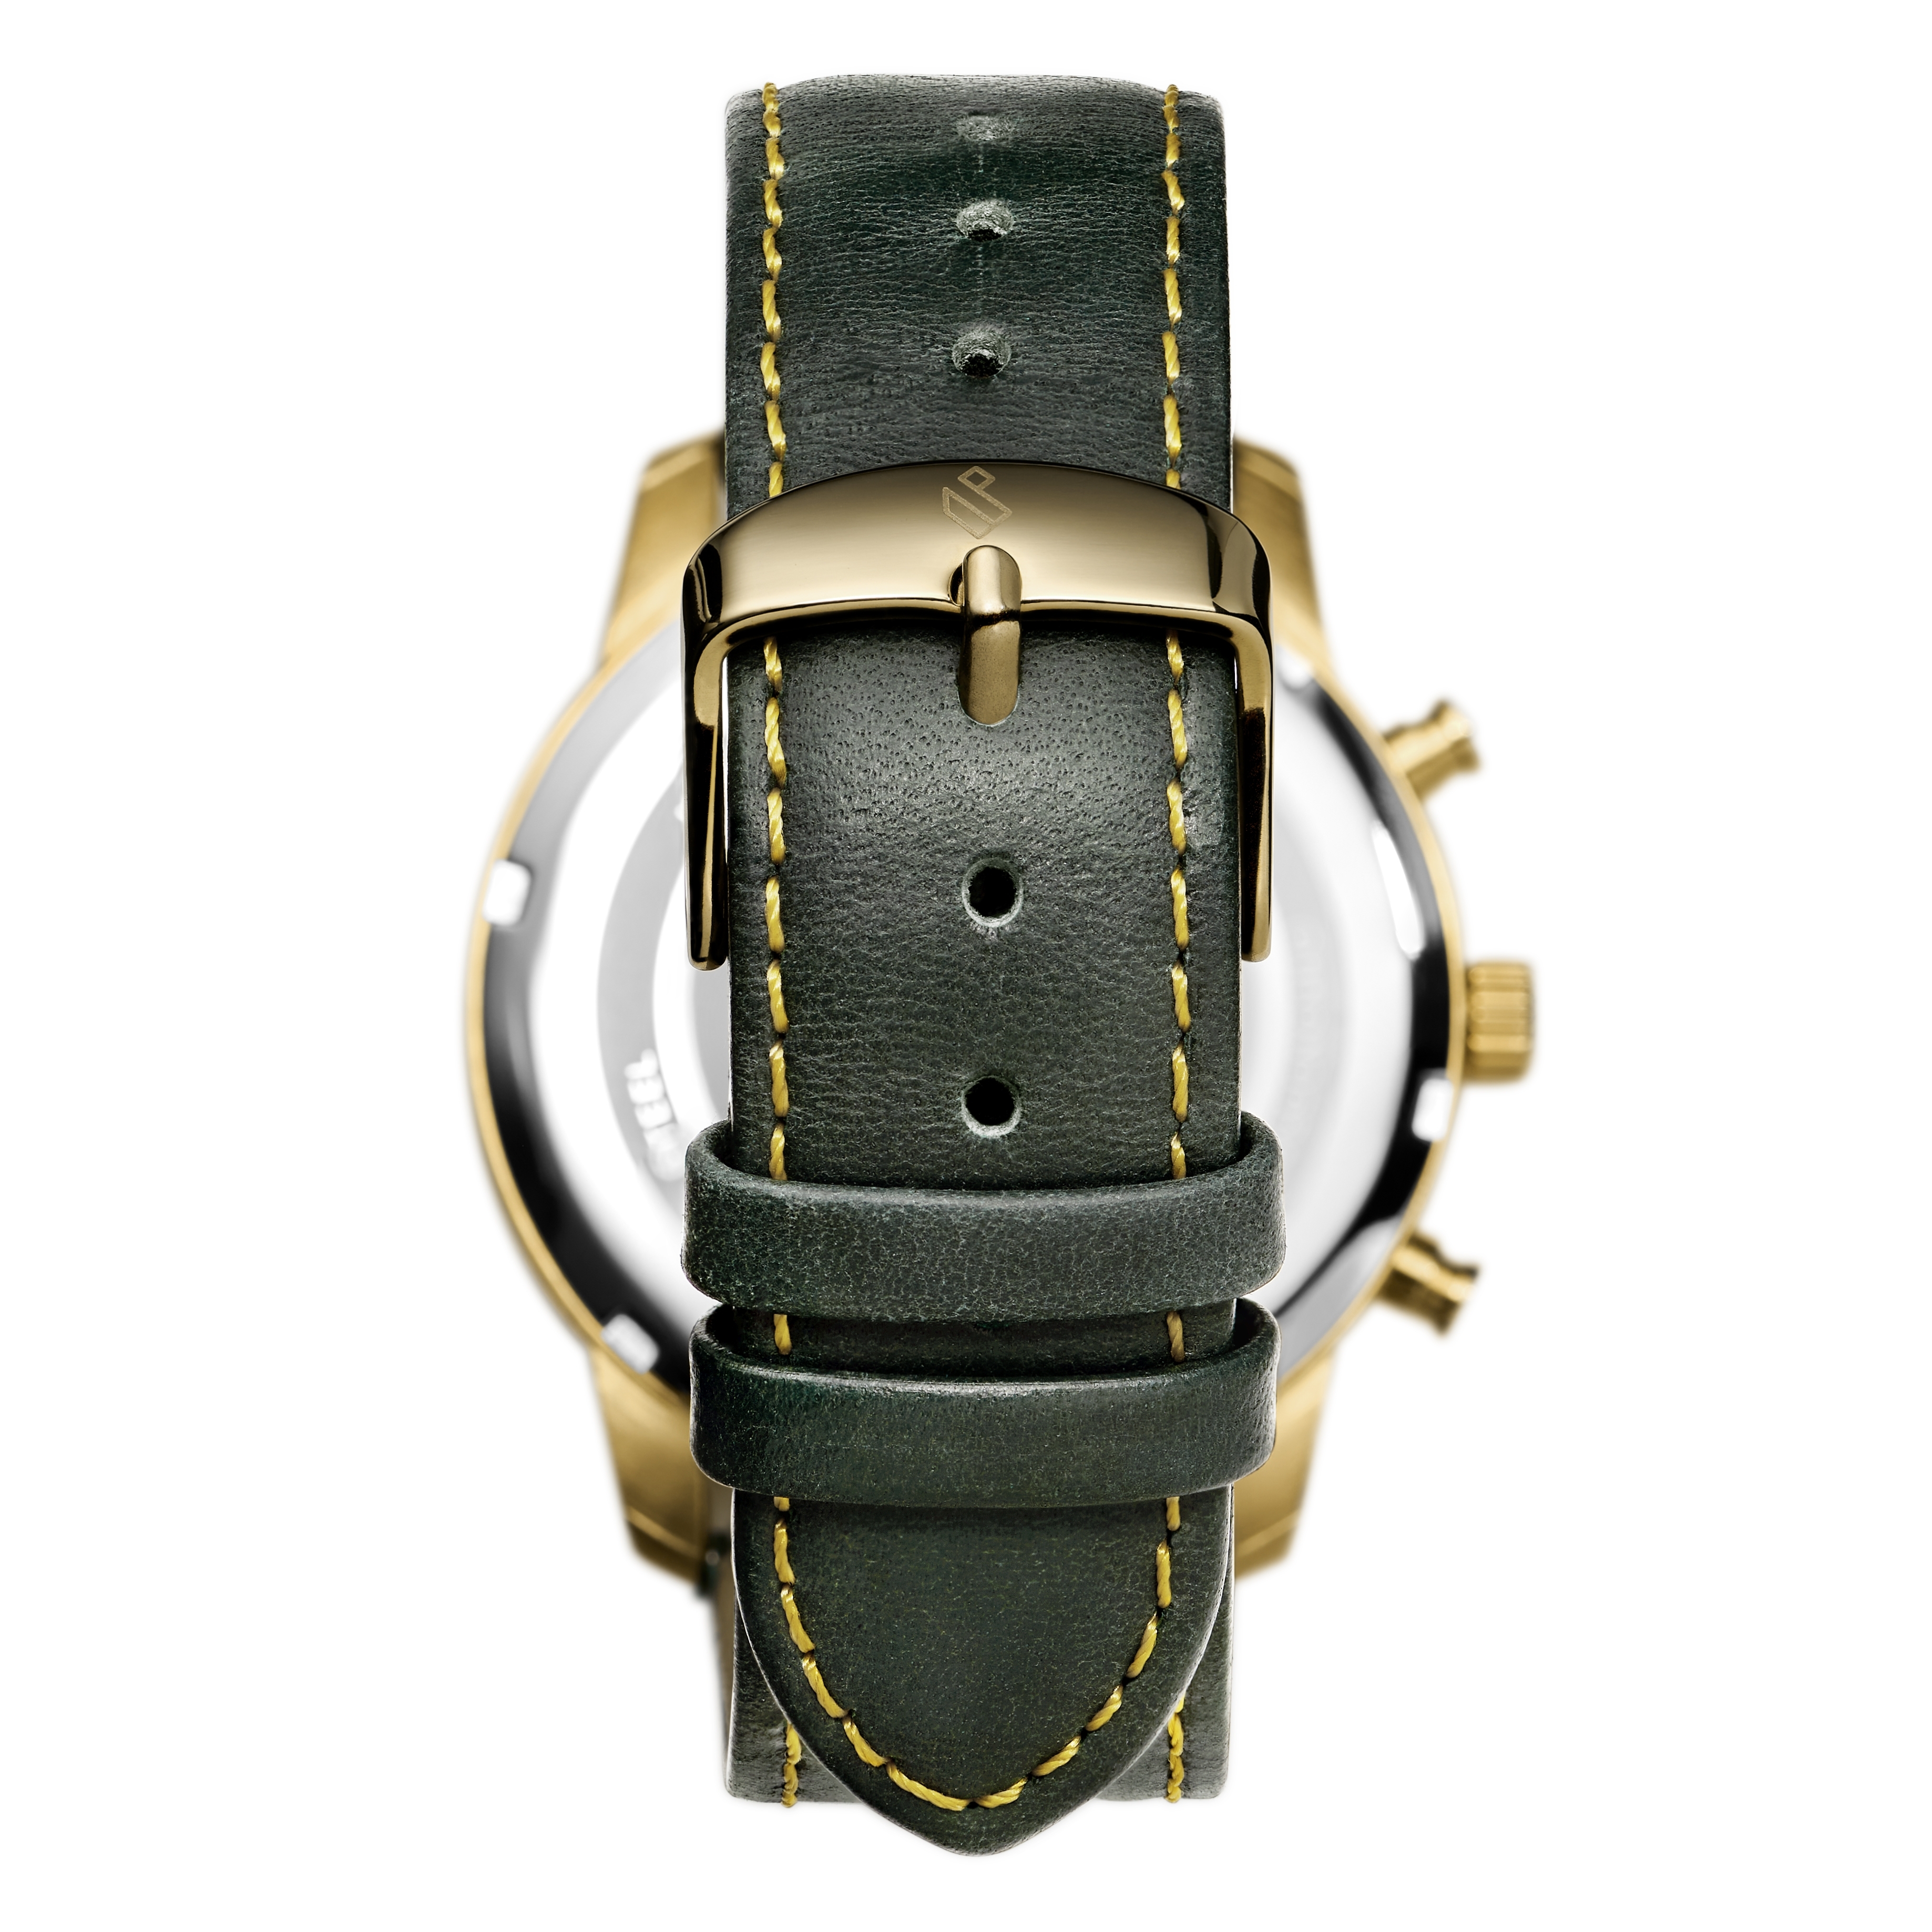 & | Parva Chronograph Leather Black stock! Gold-Tone | Strap | With Seizmont Green Dial In Watch